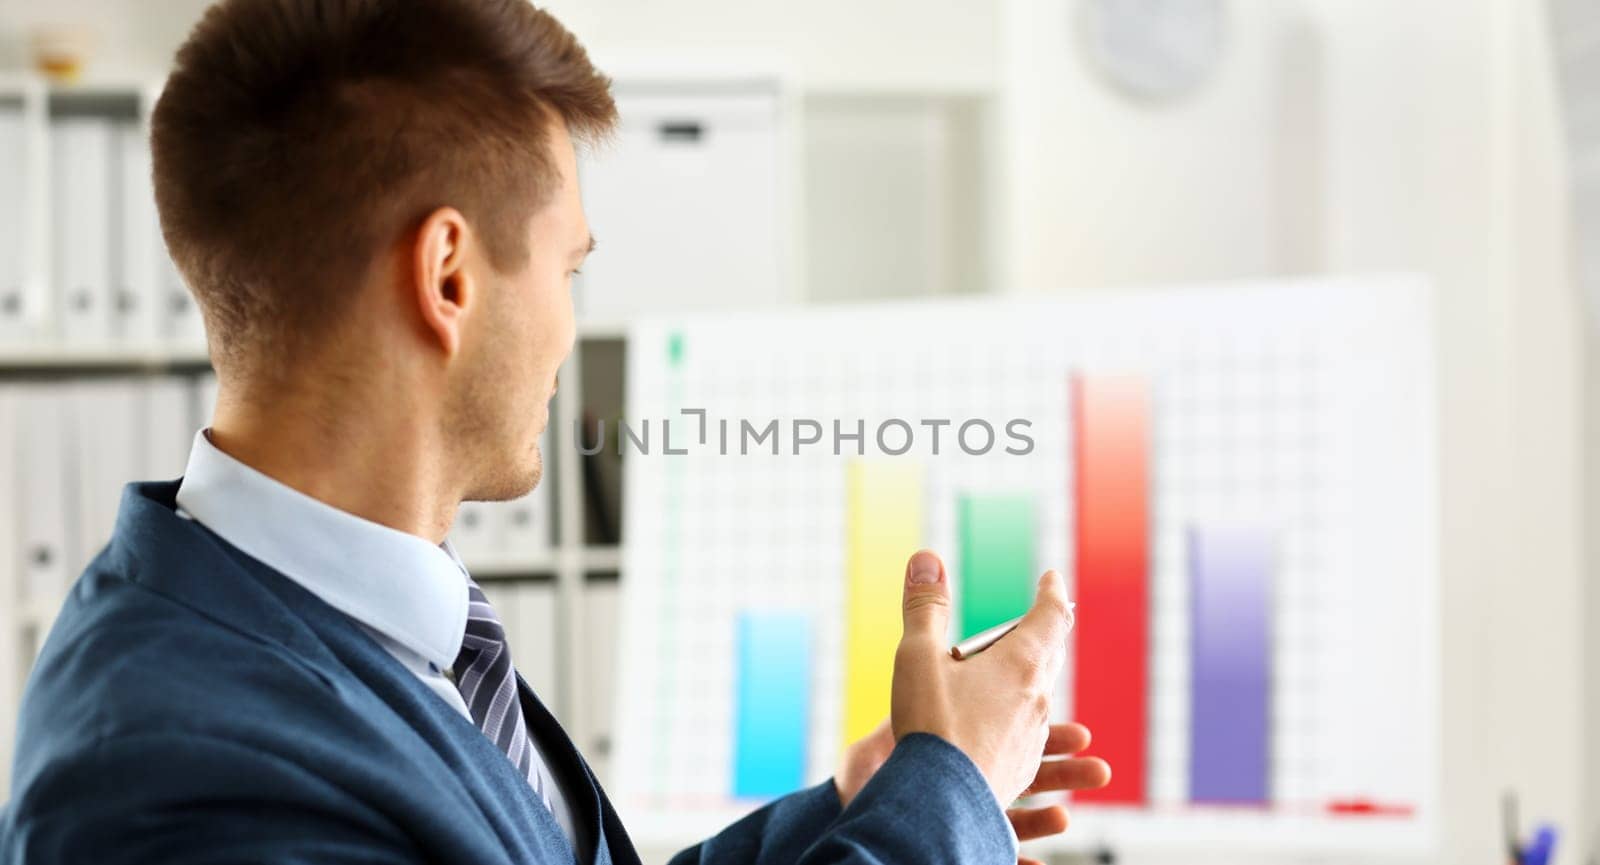 Man in suit point with arm in stats graph in office closeup. Stock exchange market advisor sale examination industry profit research occupation account career present ambition negotiation study trade